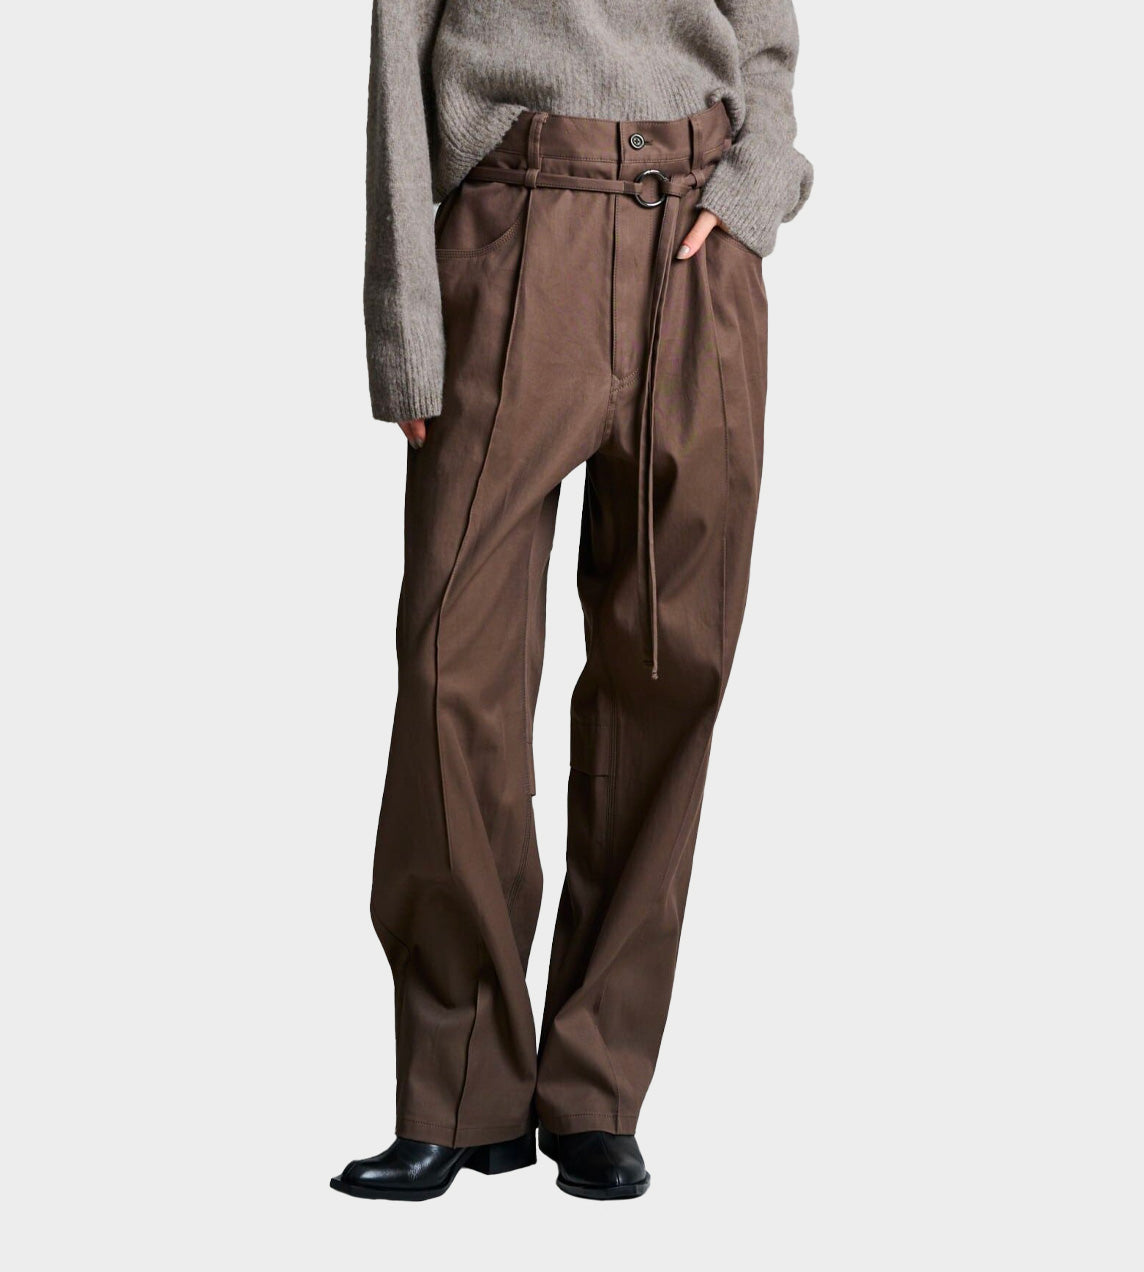 UJOH - Ring Belted Pant Mocha